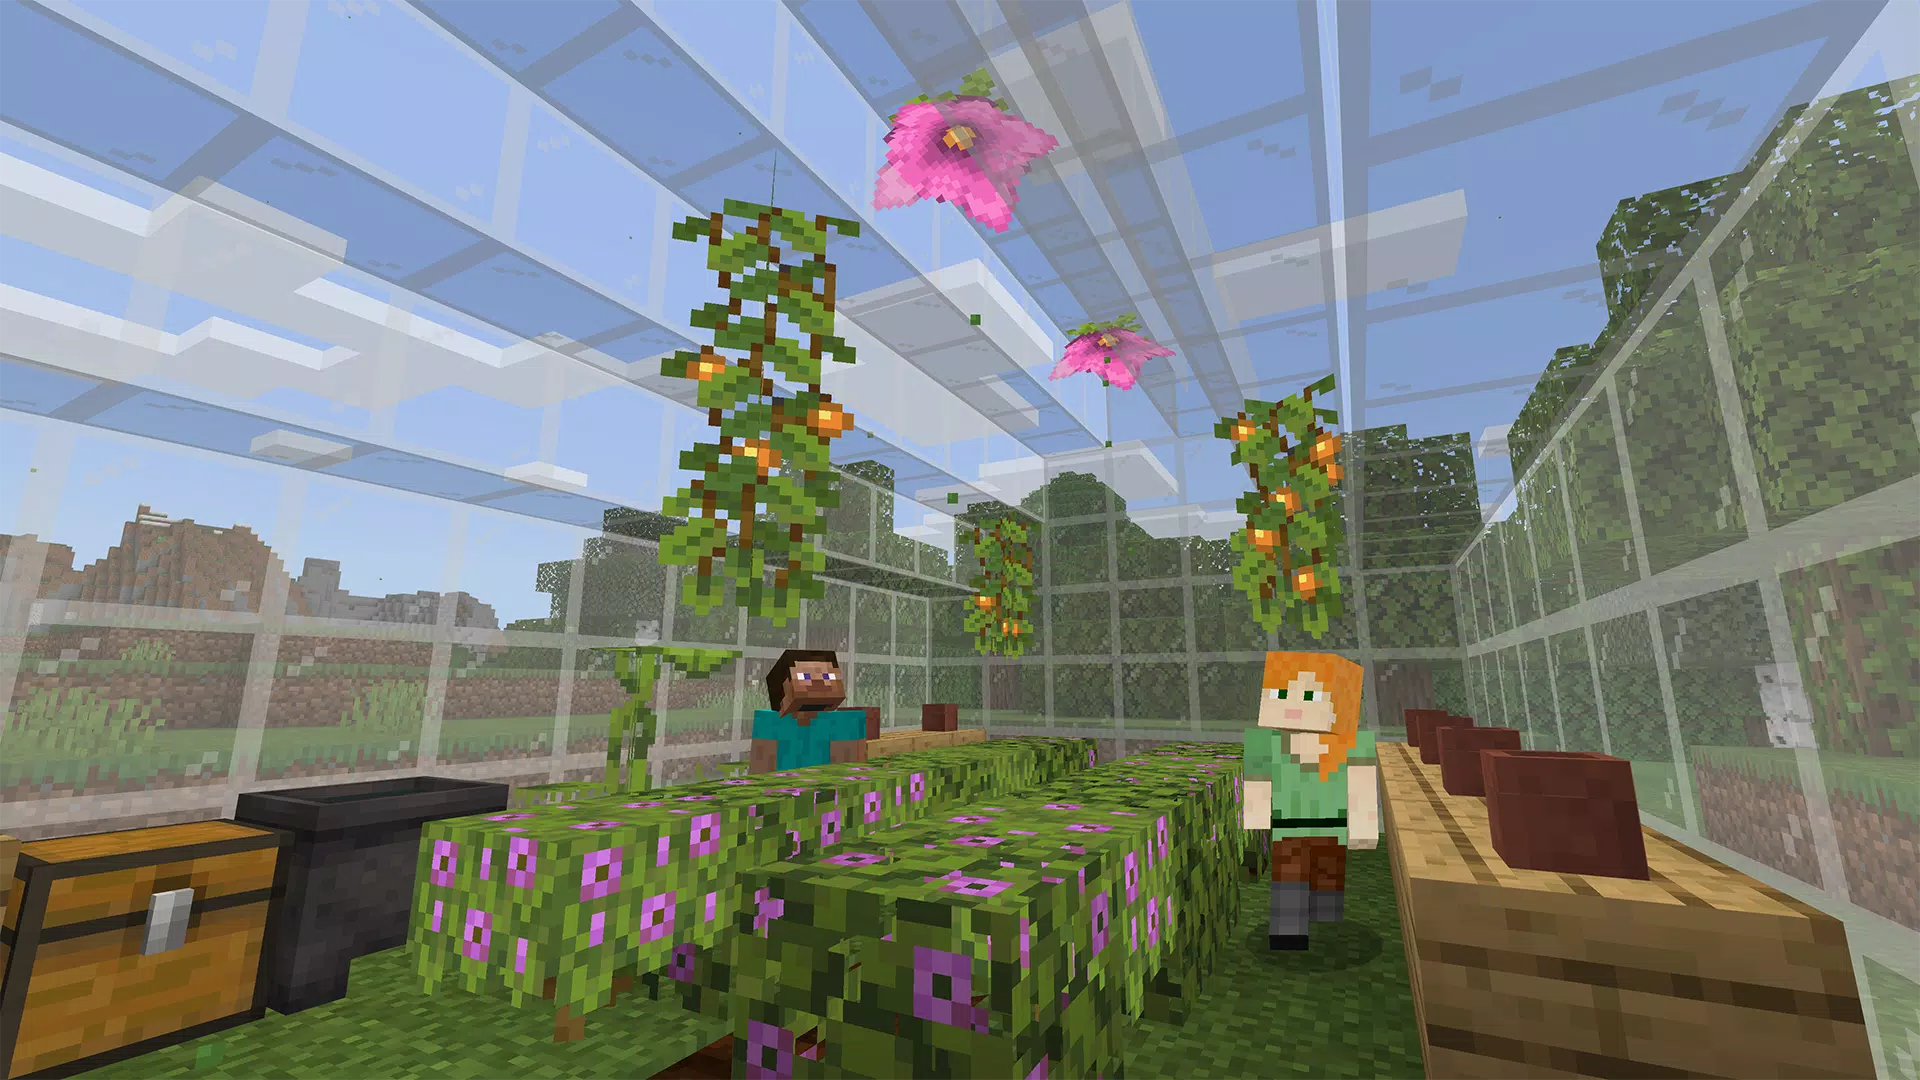 Minecraft: Education Preview APK for Android Download